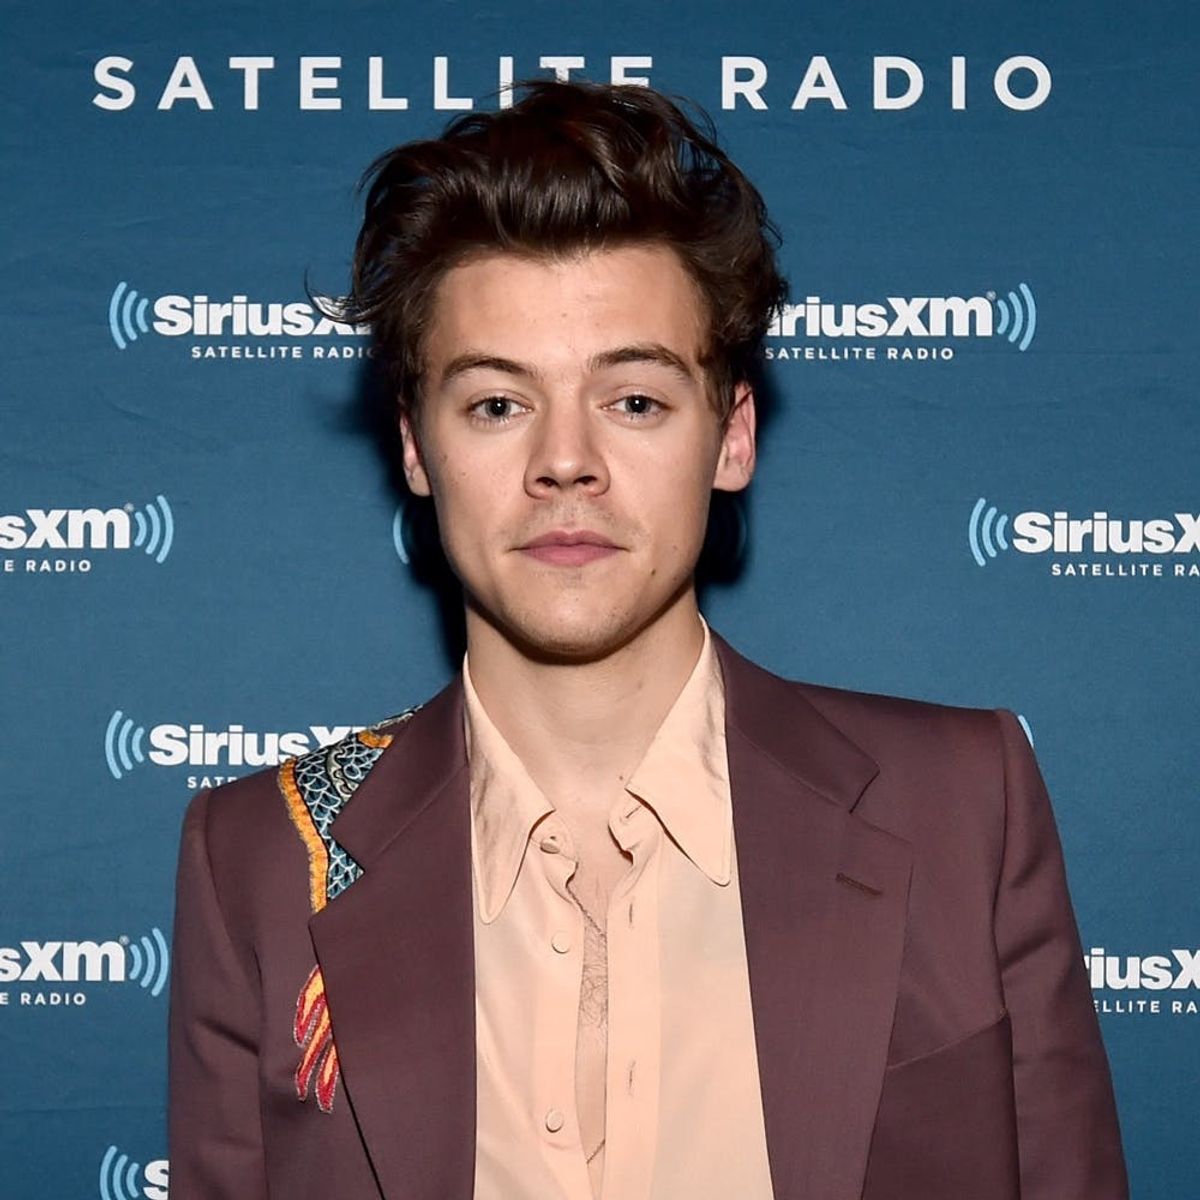 Harry Styles Made This Heartwarming Gesture for a 14-Year-Old Manchester Bomb Victim